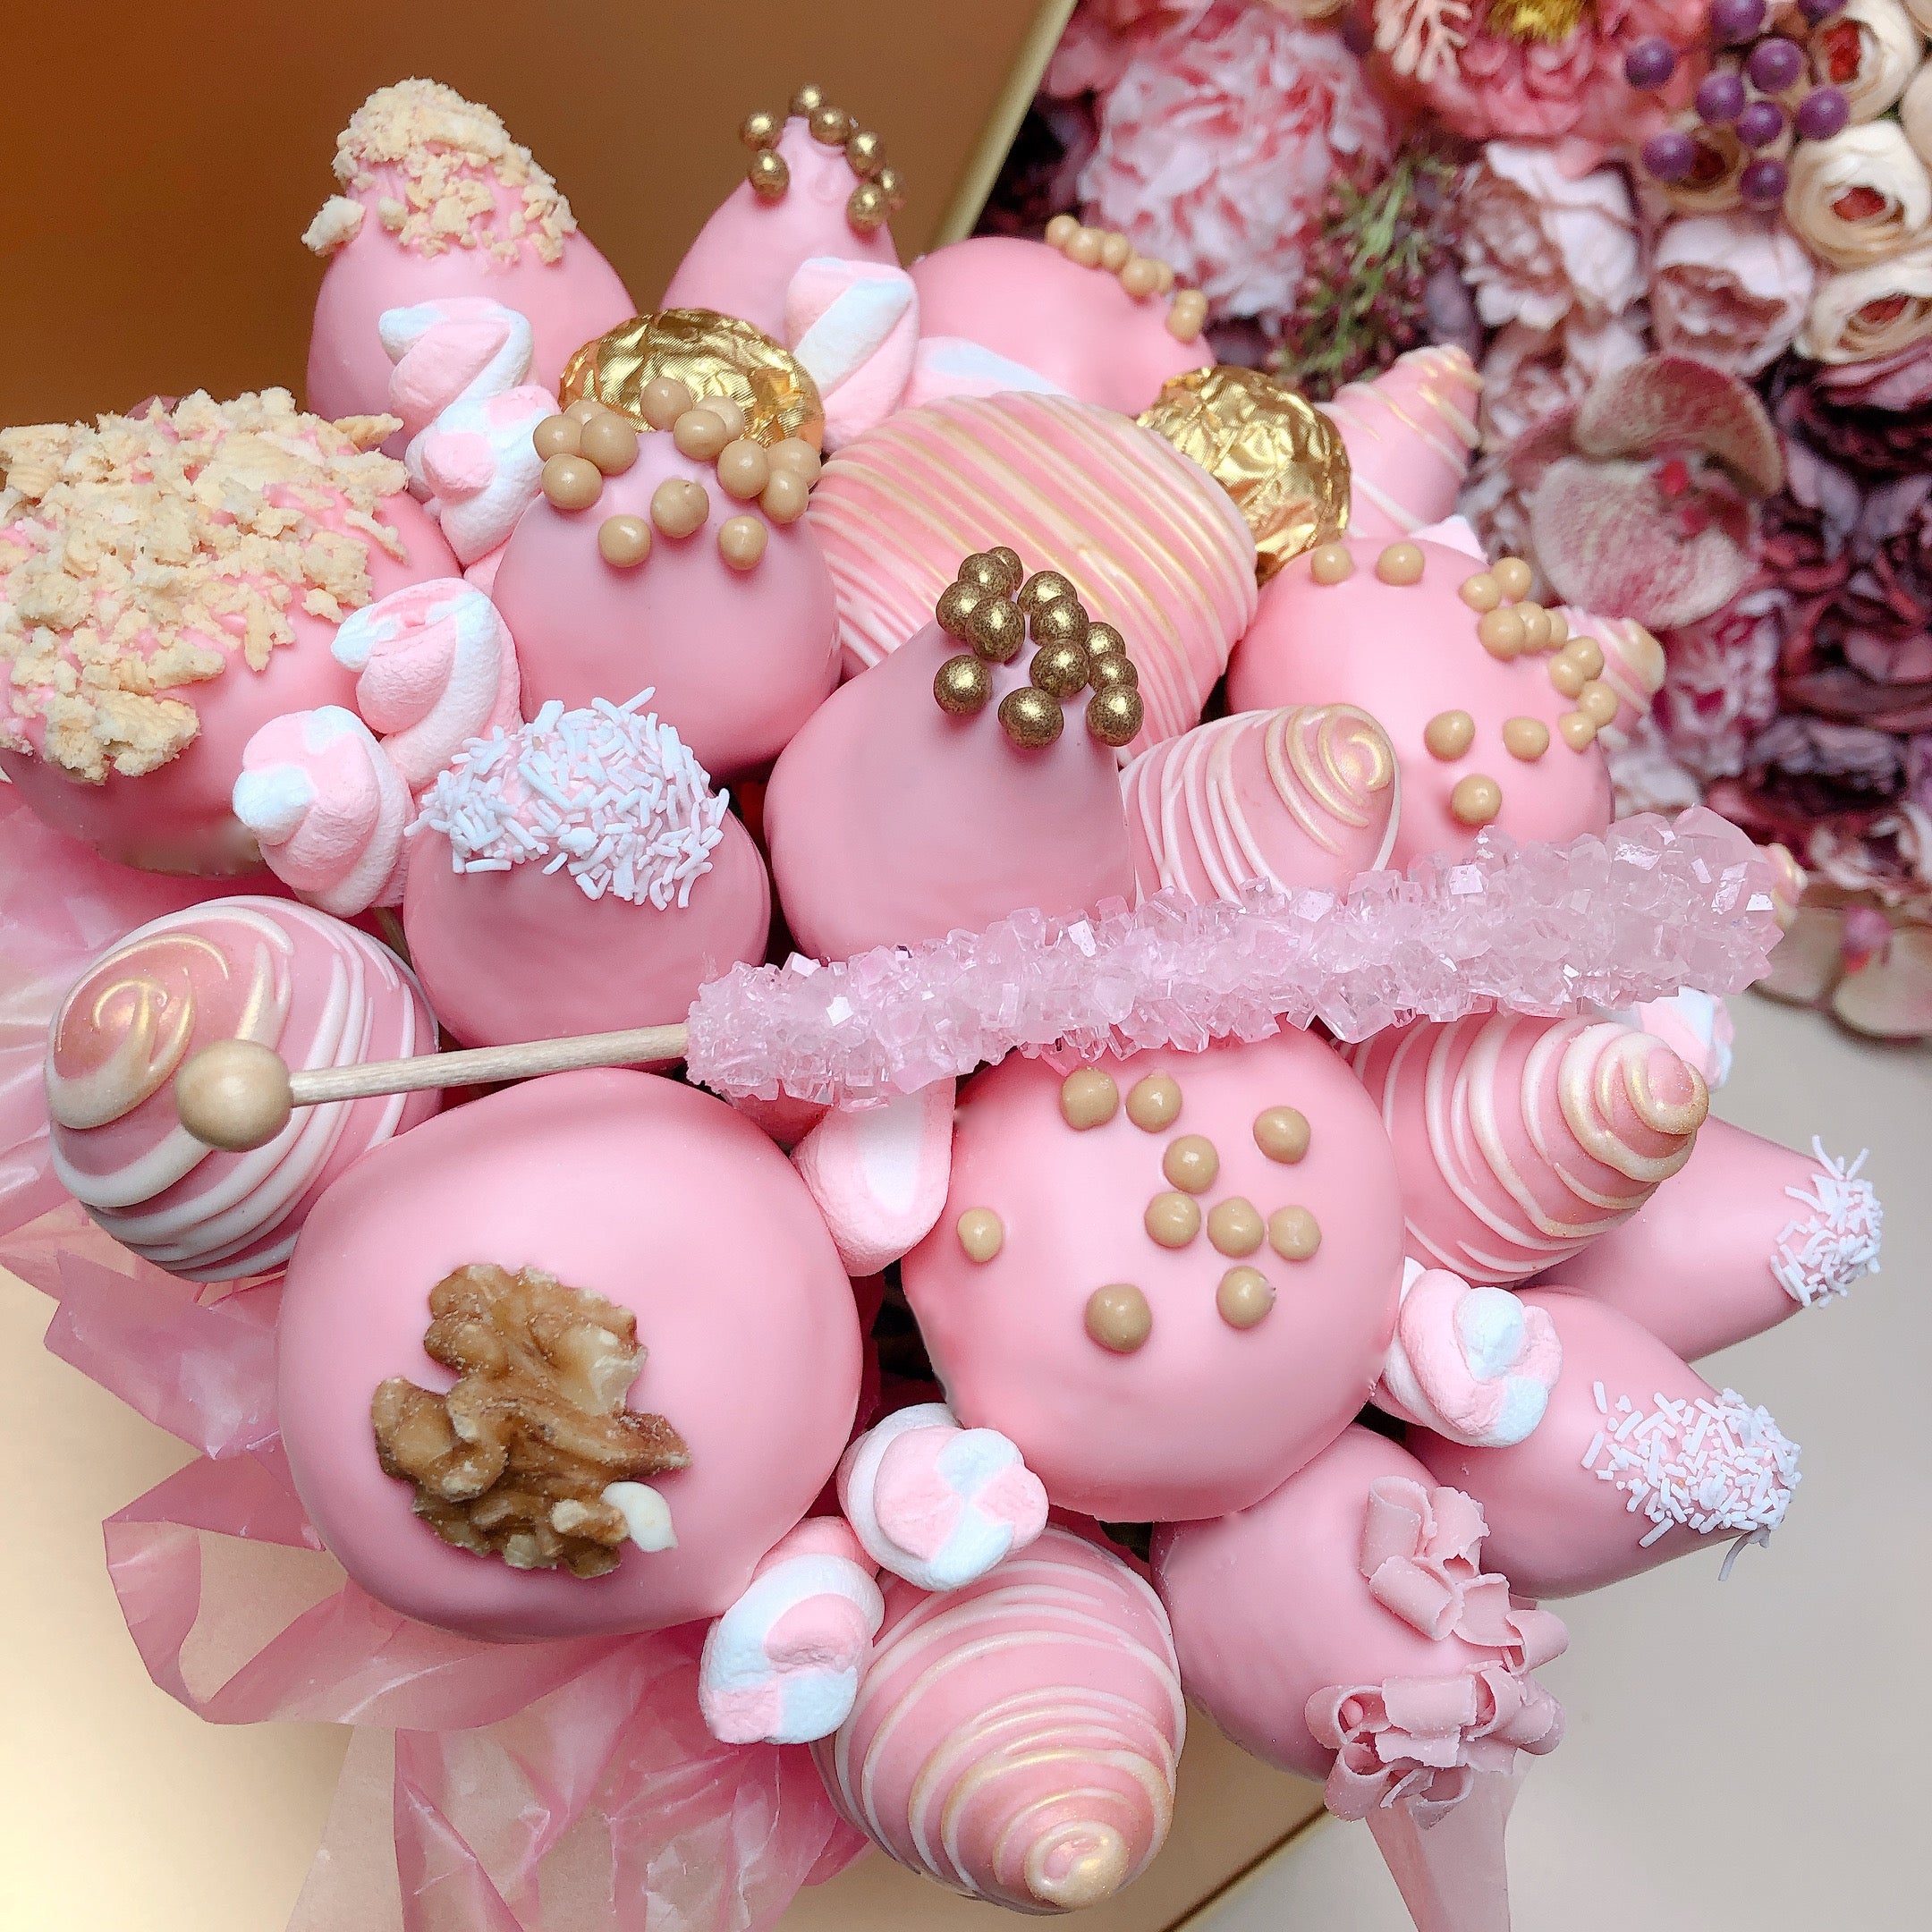 Gift for her, bouquet for mum, Wedding gift, donut bouquet with covered strawberries and marshmallows 